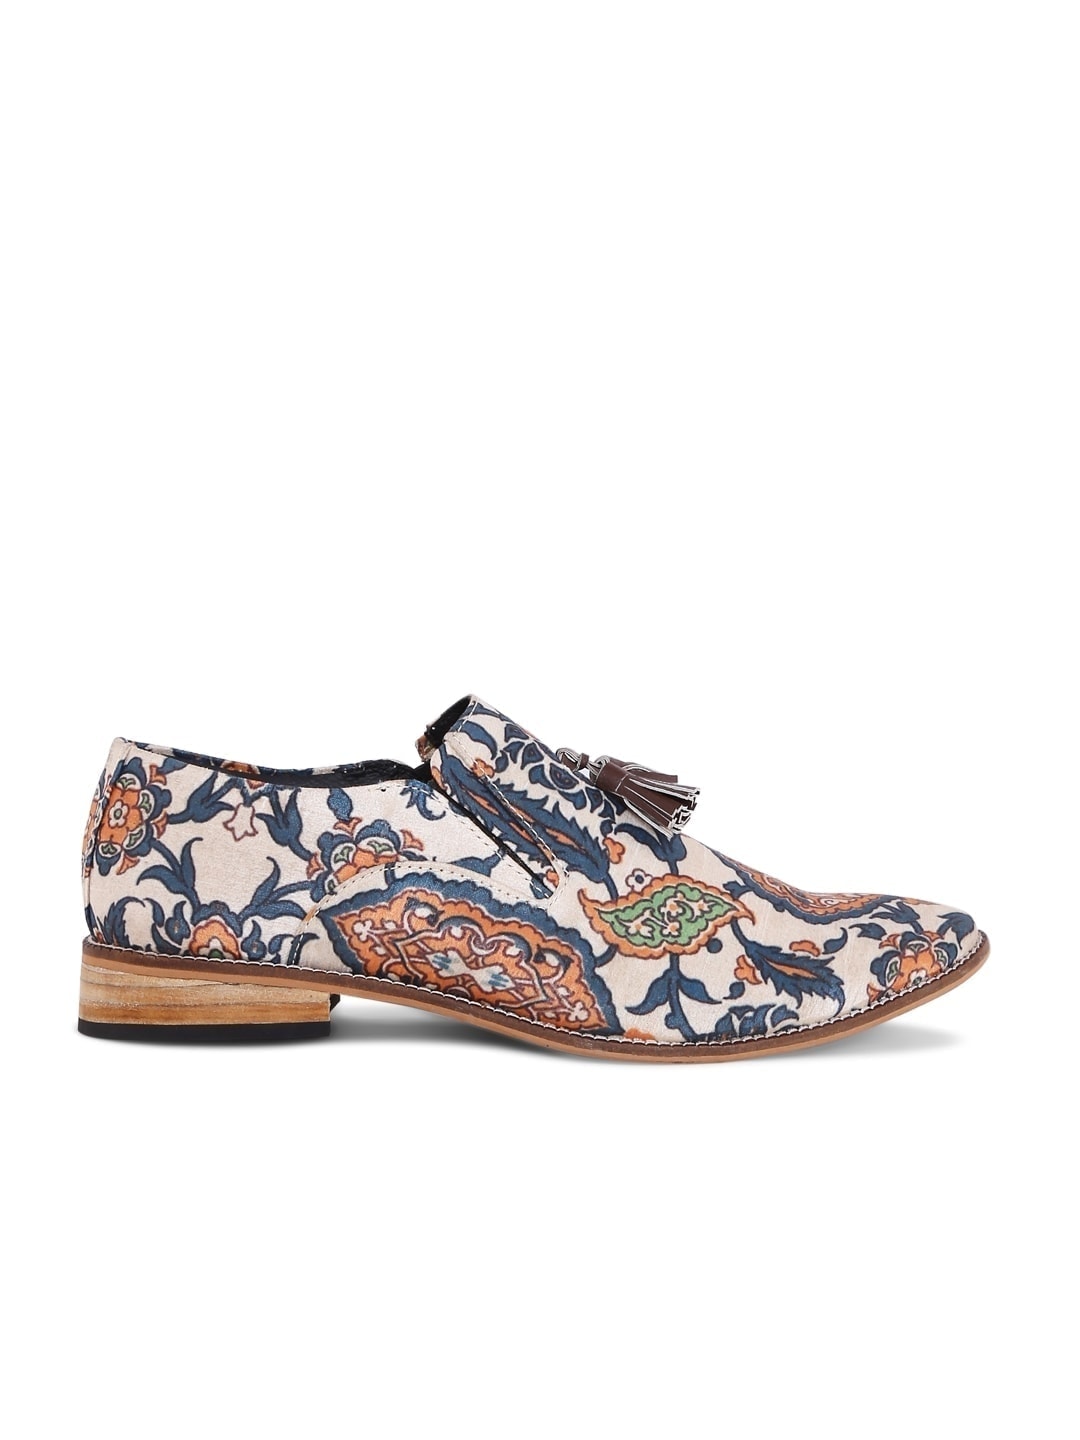 Royal Handcrafted Mughal Print Loafers